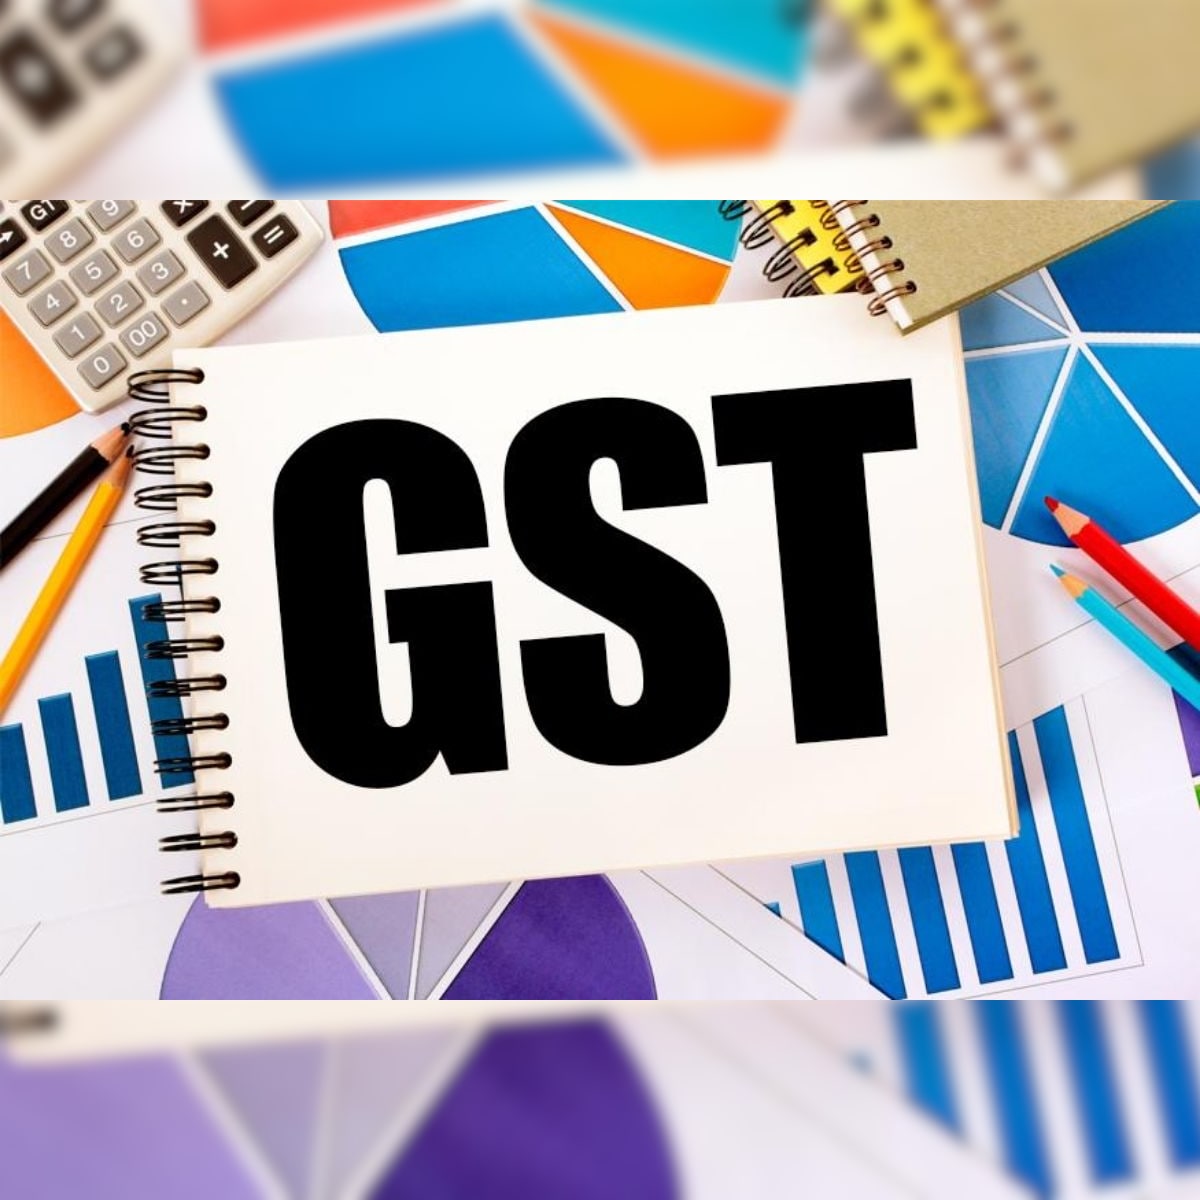 How to get new GST number in india?